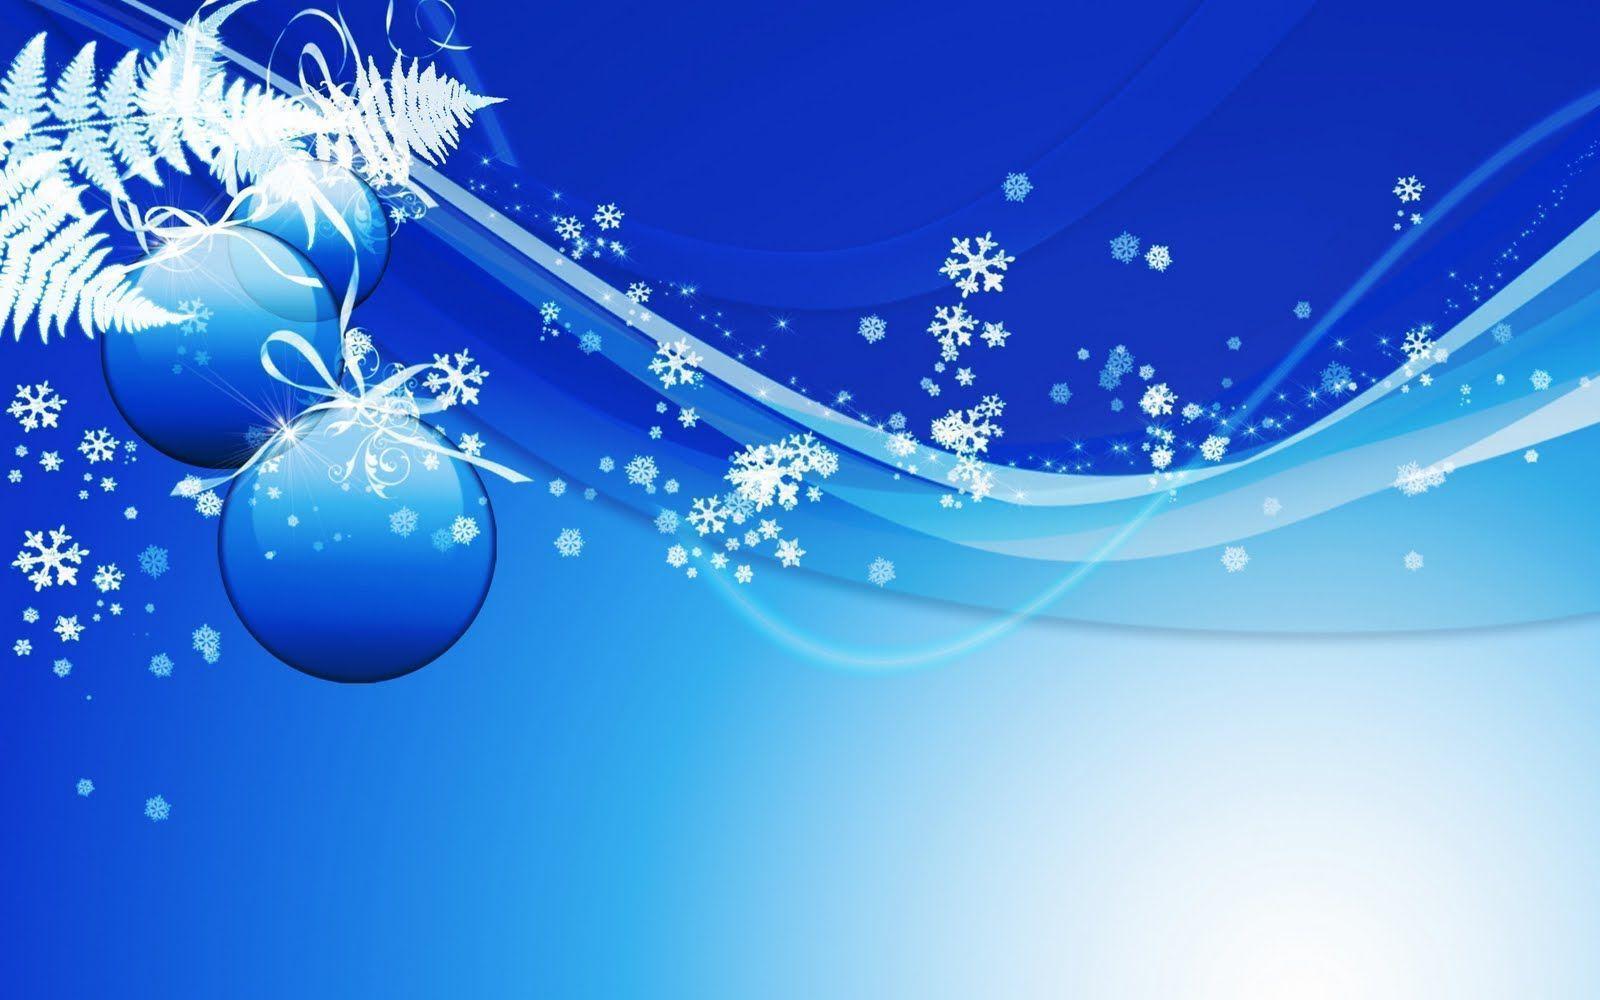 Merry Christmas 3D Backgrounds